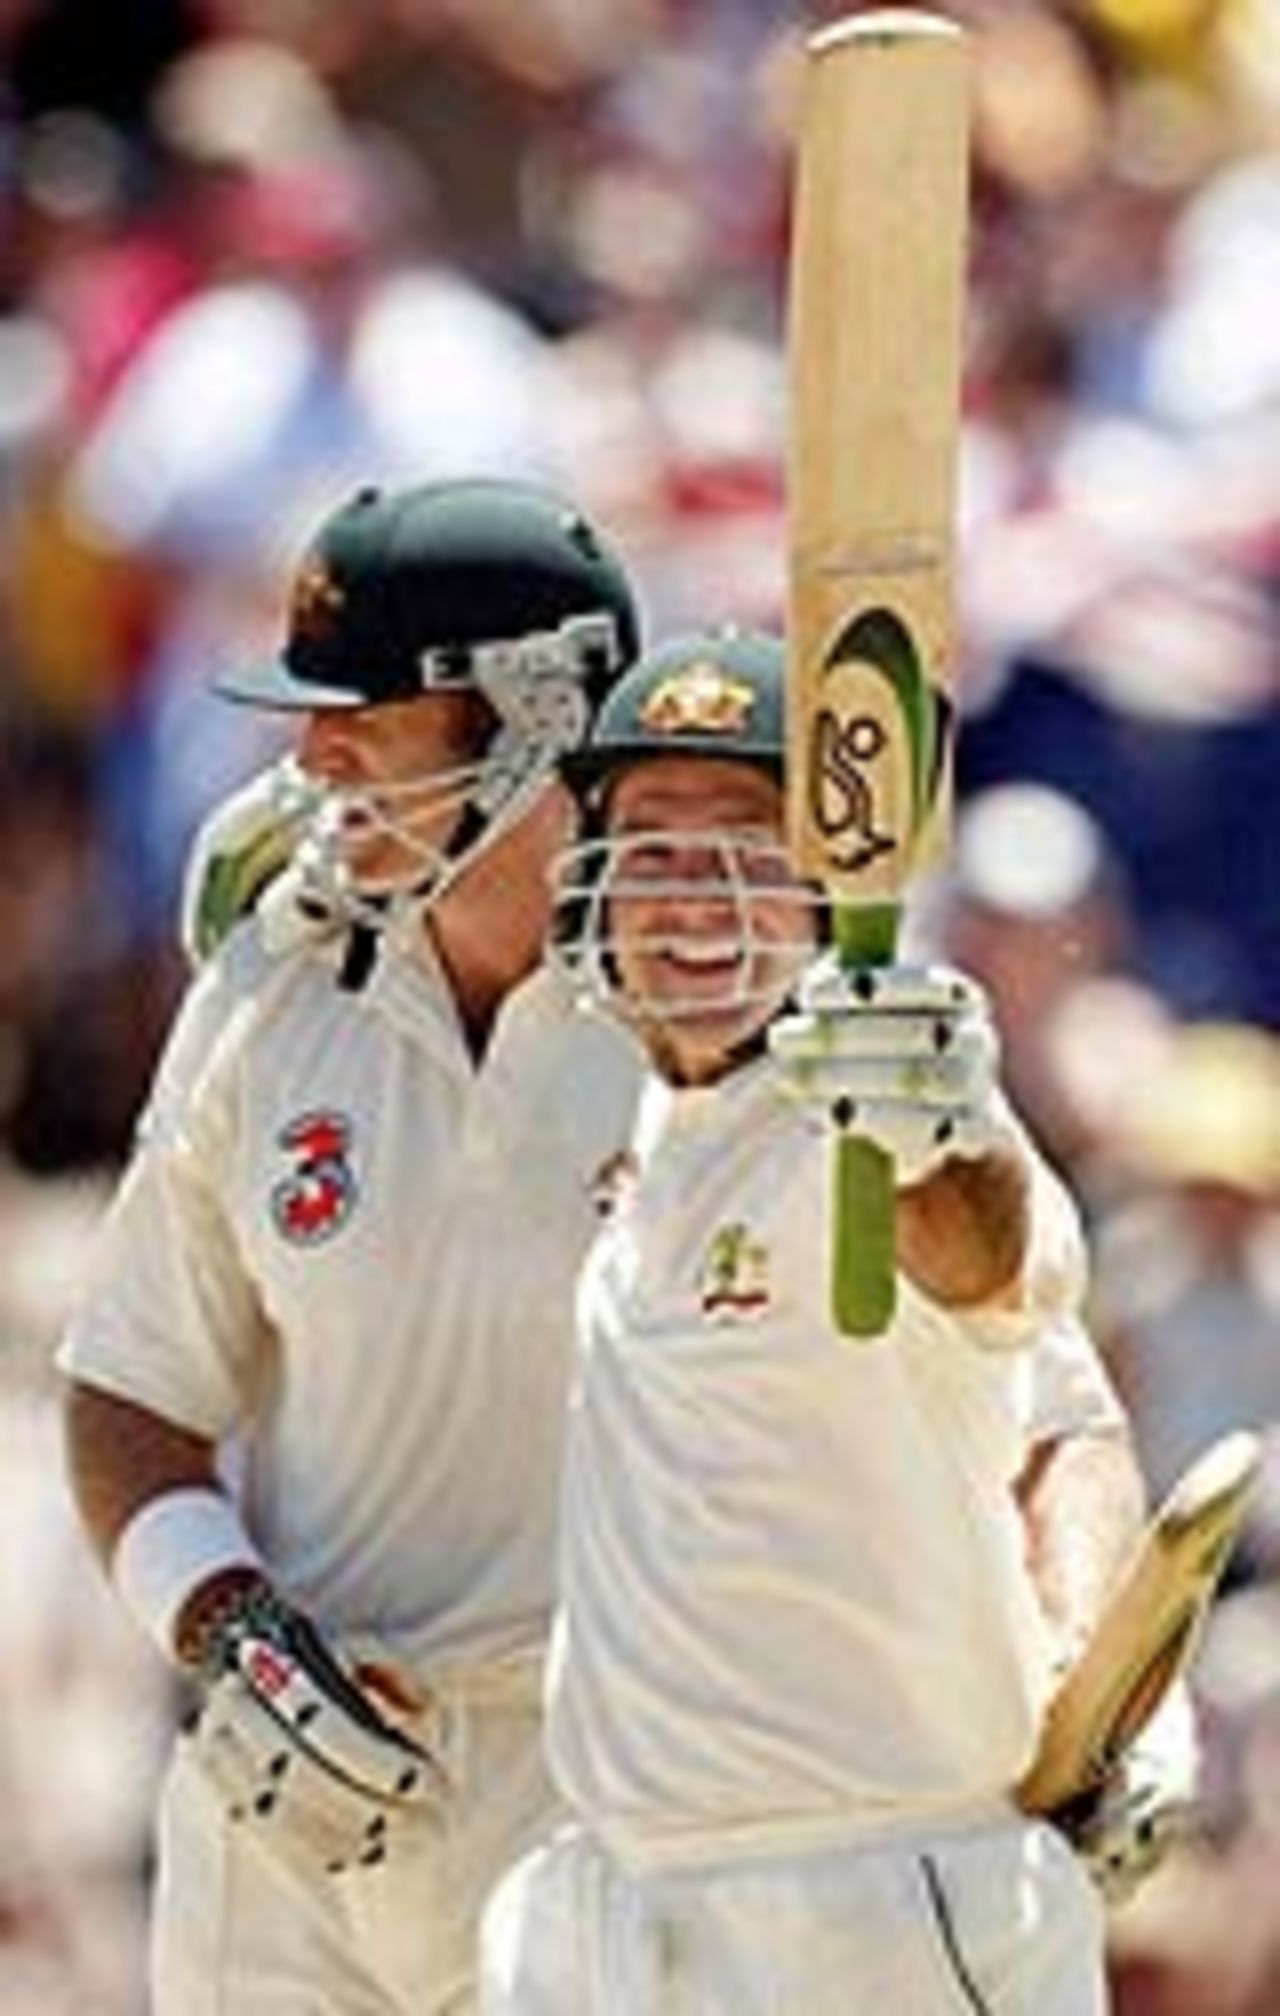 Matthew Hayden and Ricky Ponting celebrate after scoring the winning runs in the Boxing Day Test, Australia v India, 3rd Test, Melbourne, 5th day, December 30, 2003